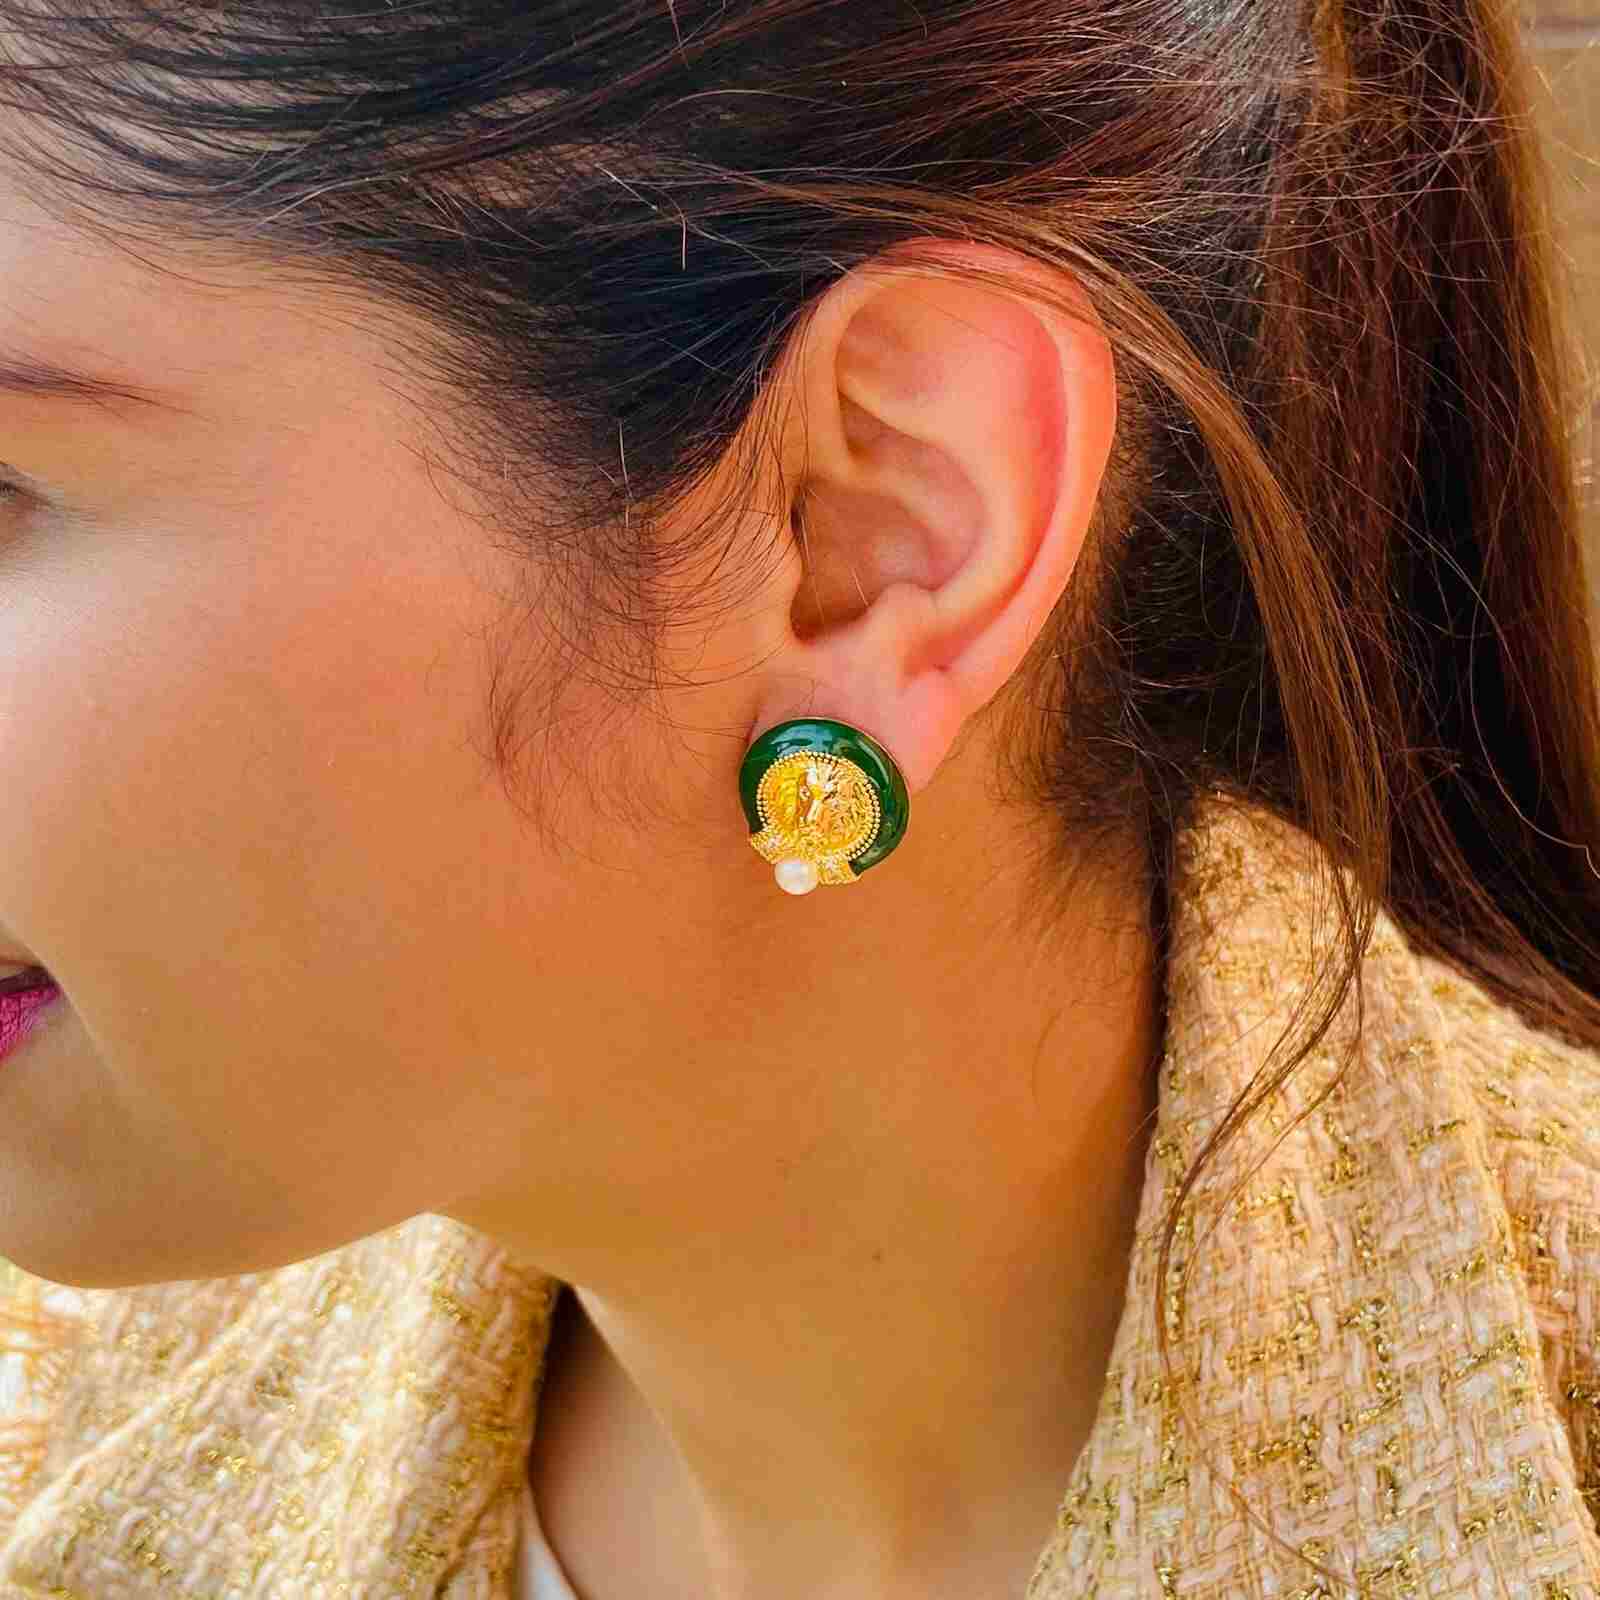 Green Earrings with Lion